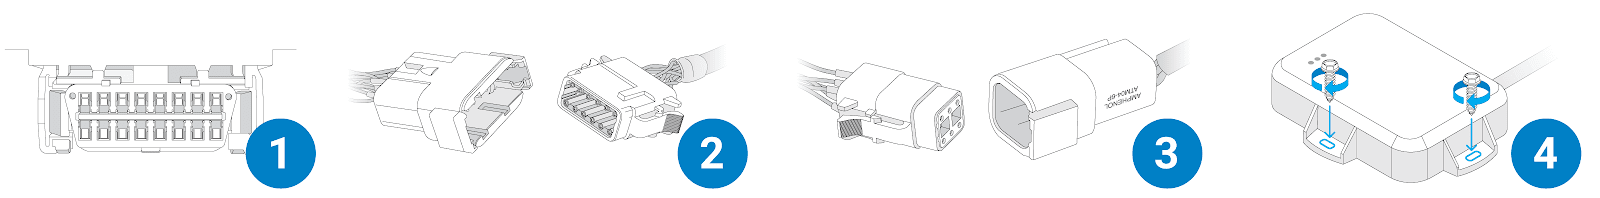 Illustration of the ruggedized telematics device installation in four steps — Step 1 hows the location of a vehicle's engine diagnostic port; Step 2 shows a 12-pin male connector on the GO9 RUGGED device and a 12-pin female connector on a corresponding harness; Step 3 shows a 6-pin female connector on an IOX device and a 6-pin male connector on the HRN-RX06S4 harness; Step 4 shows the ruggedized telematics device is being secured using the supplied head screws.